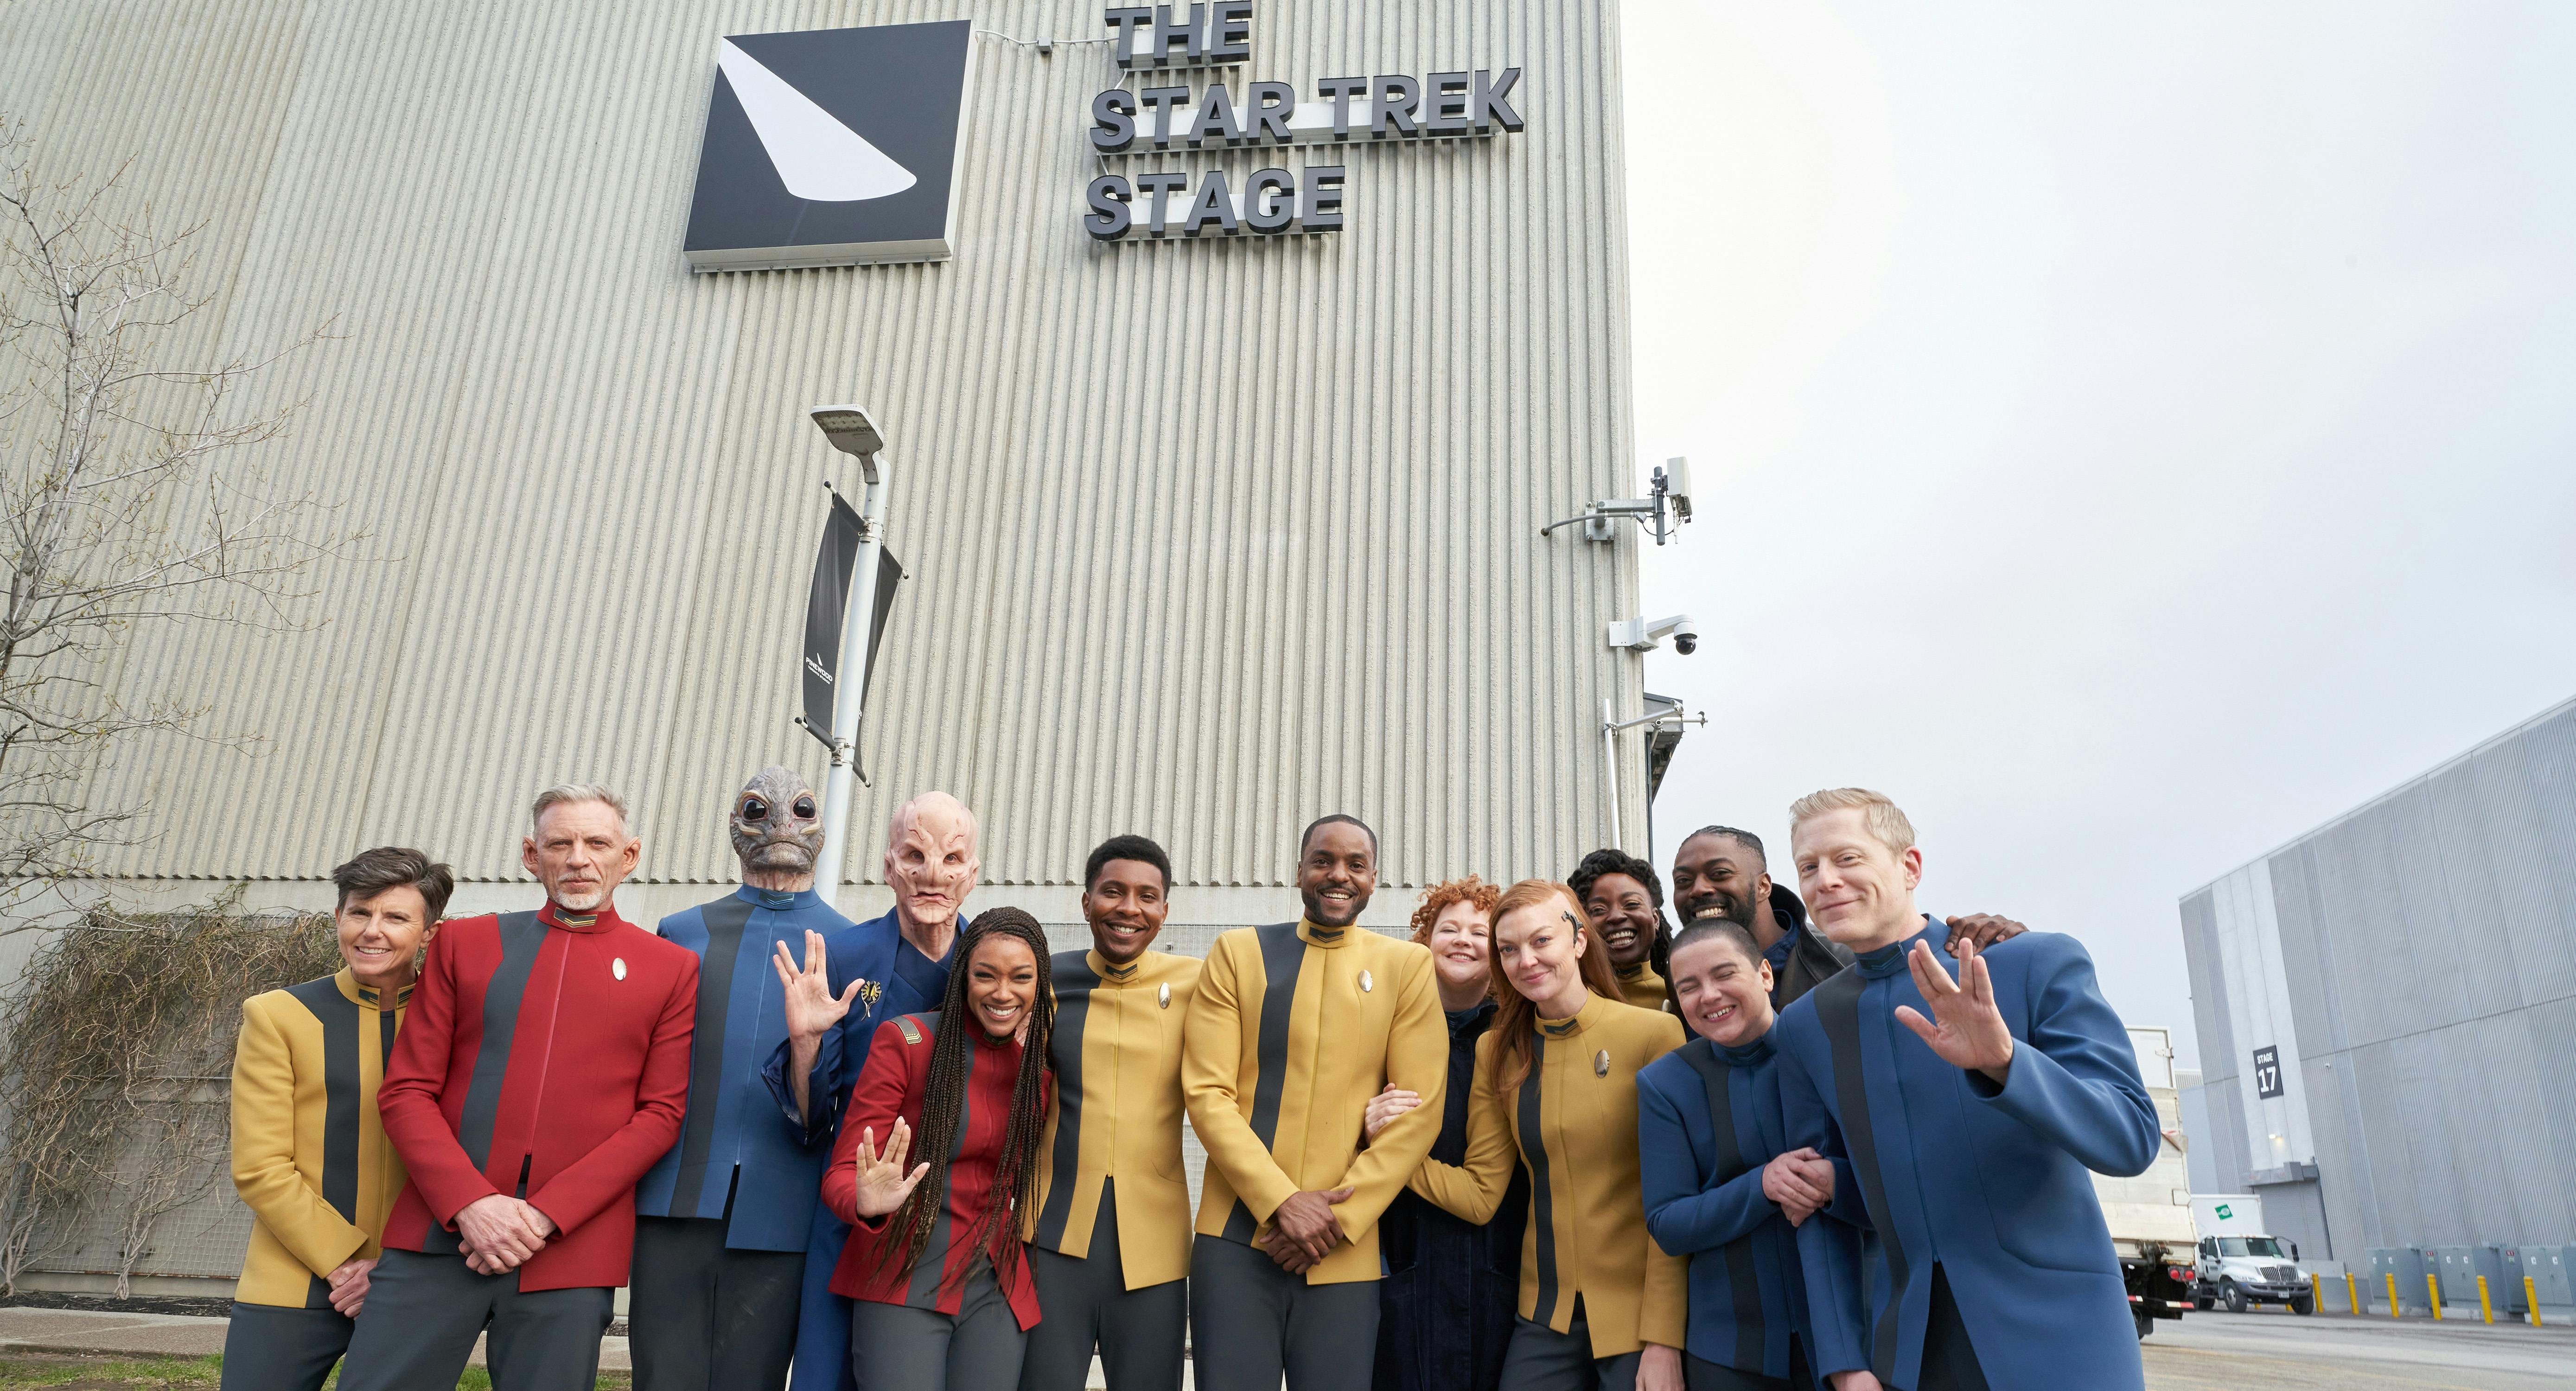 Cast of Star Trek: Discovery in costume stand in front of the newly renamed Star Trek stage in Pinewood Toronto